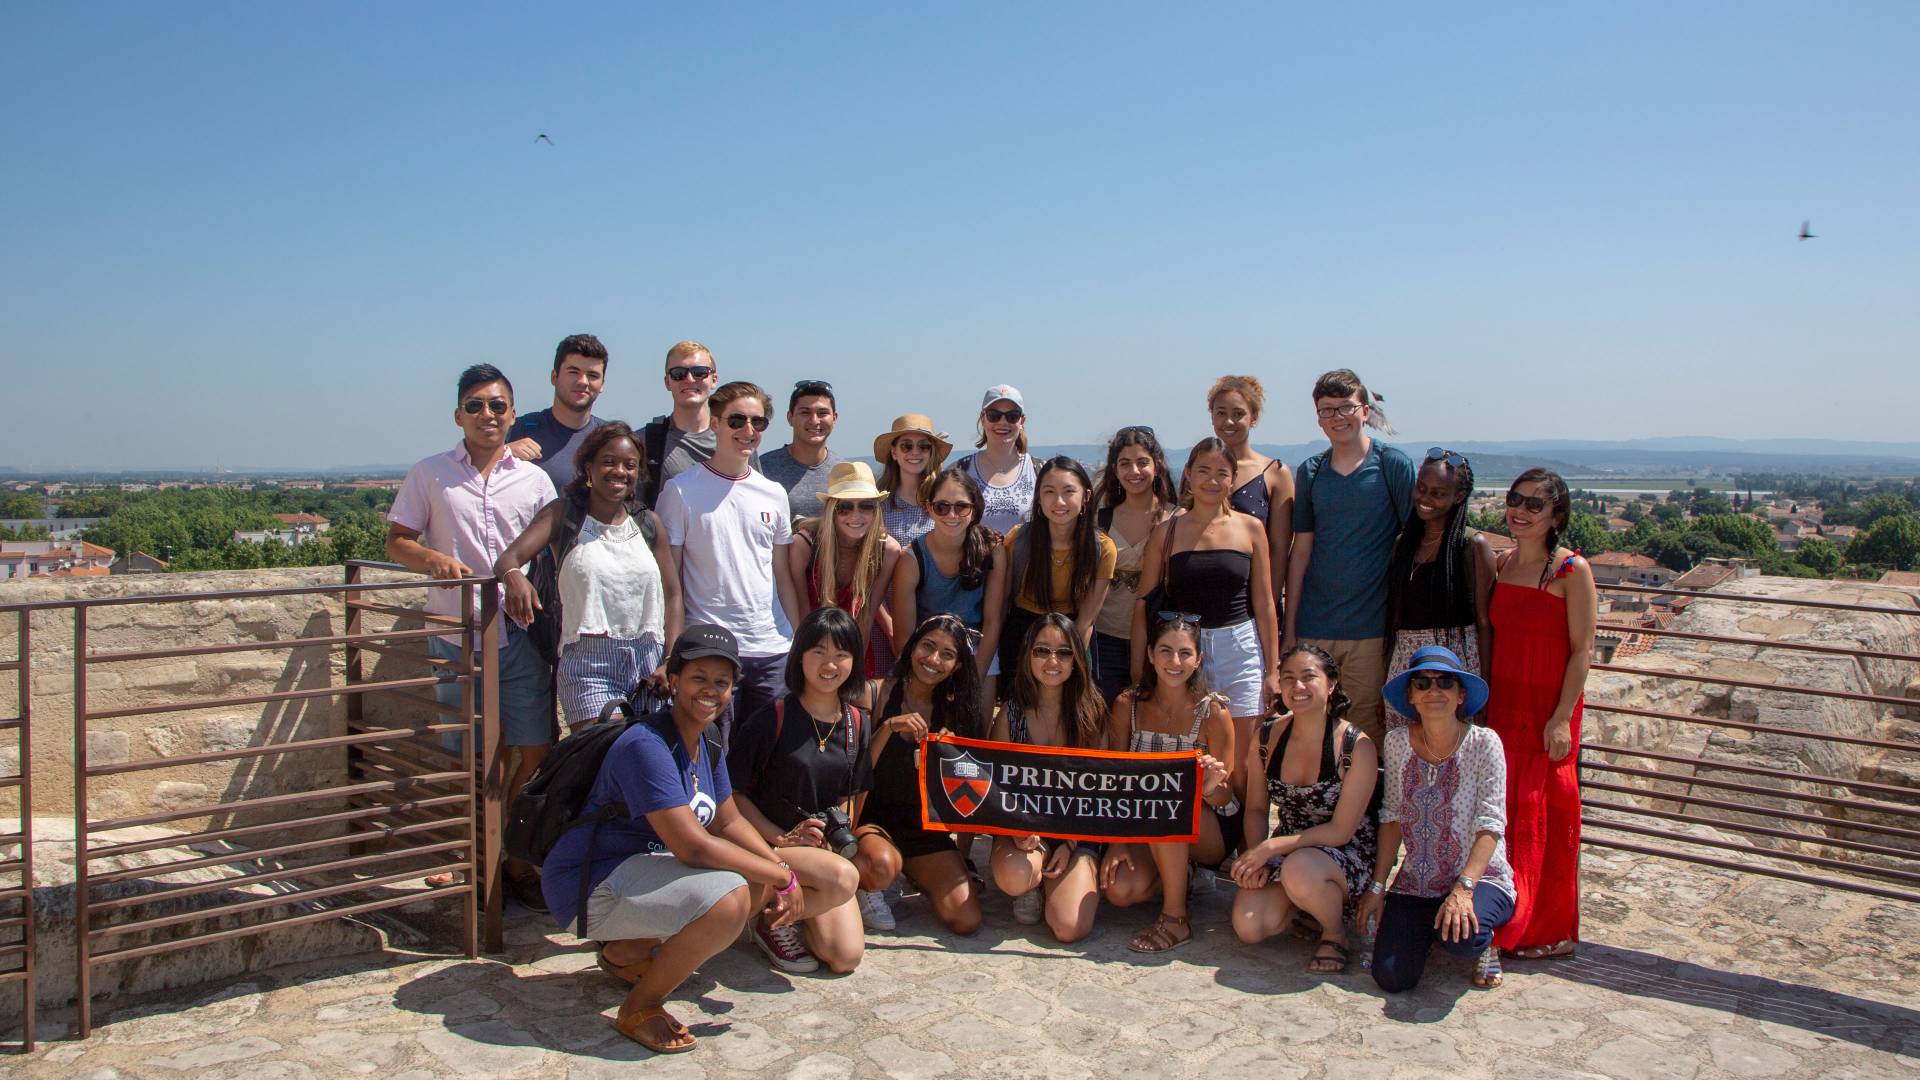 Students and faculty pose with Princeton University banner in France